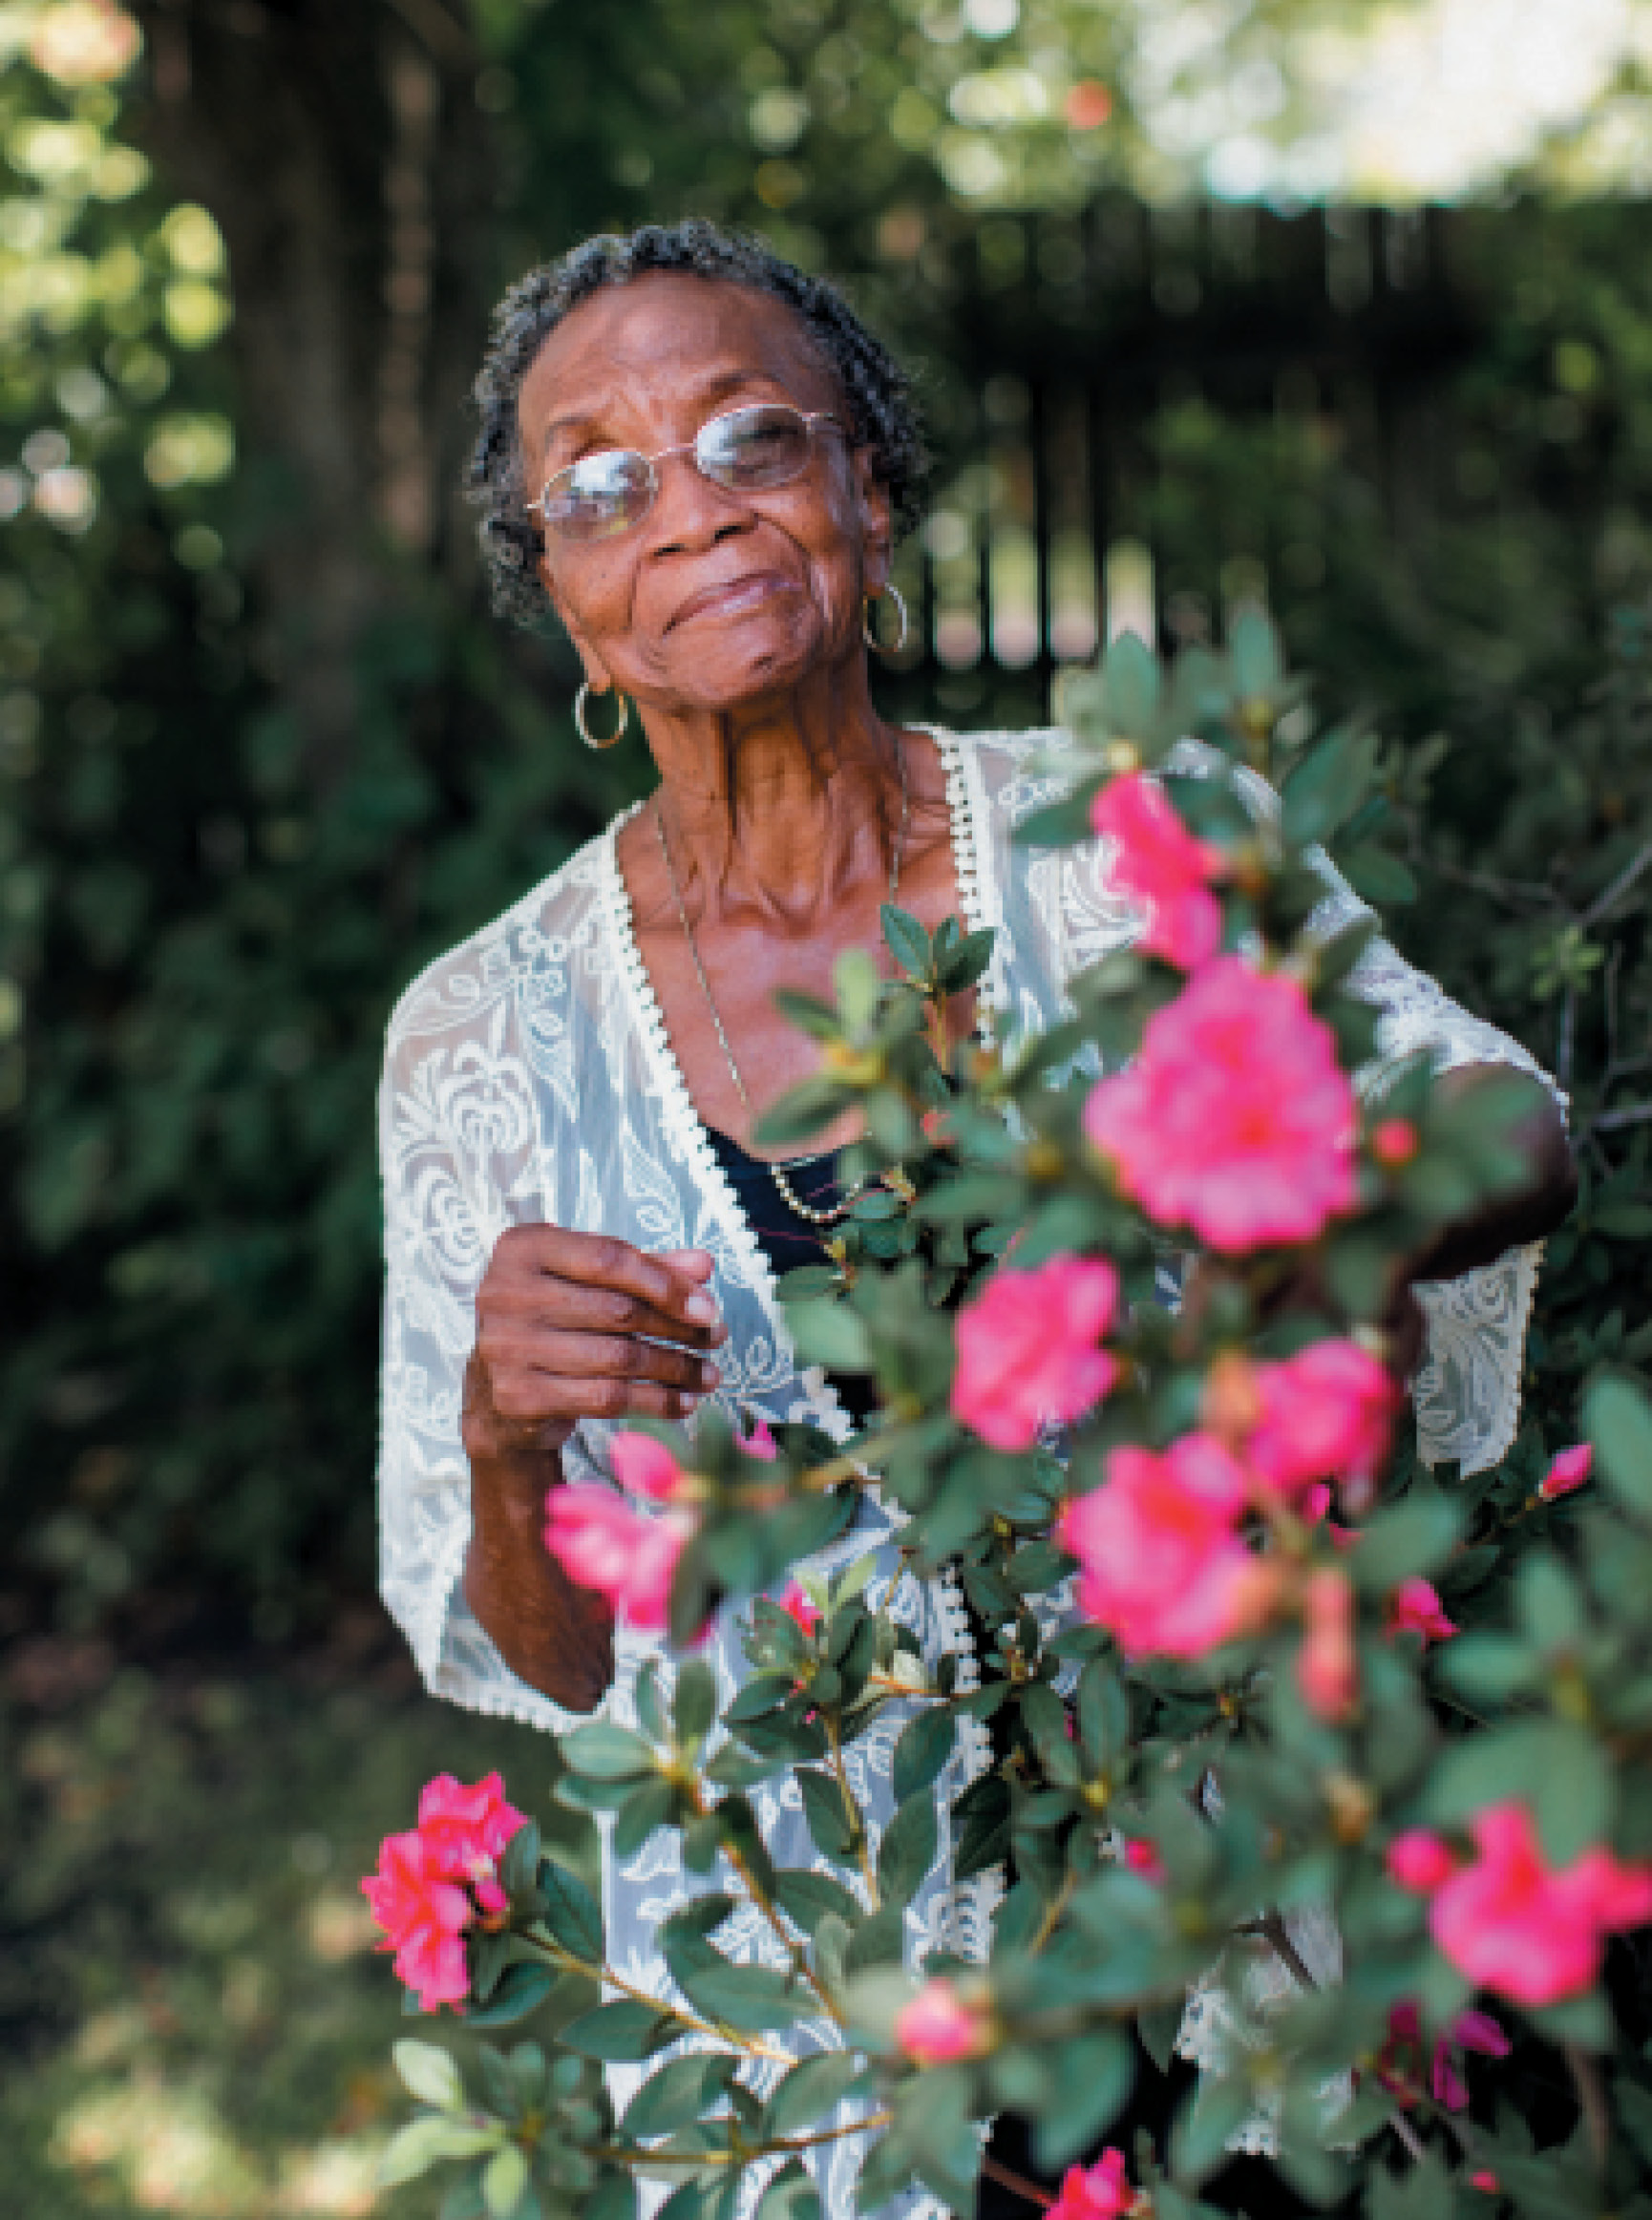 The Grower: Martin-Carrington’s nurturing expertise extends to her garden. “She took cuttings from my wedding bouquet and somehow made them grow into plants,” says her granddaughter Ashley Meader. “She puts her hands into the dirt, and something different happens. There’s a magic and energy about her that literally starts from the ground up. People are drawn to her, and plants too!”